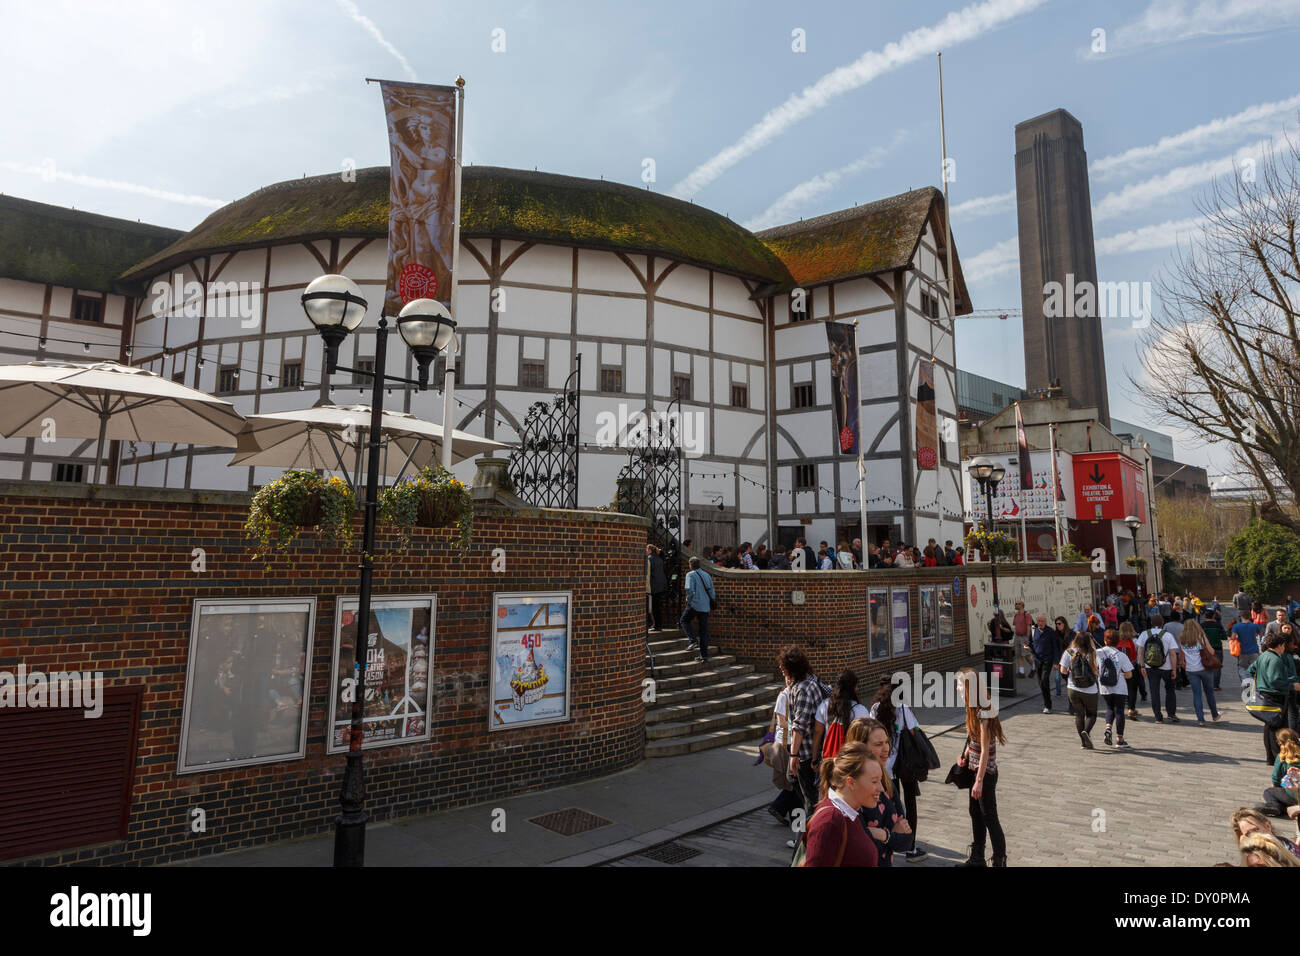 The Globe Theatre London associated with William Shakespeare. Stock Photo